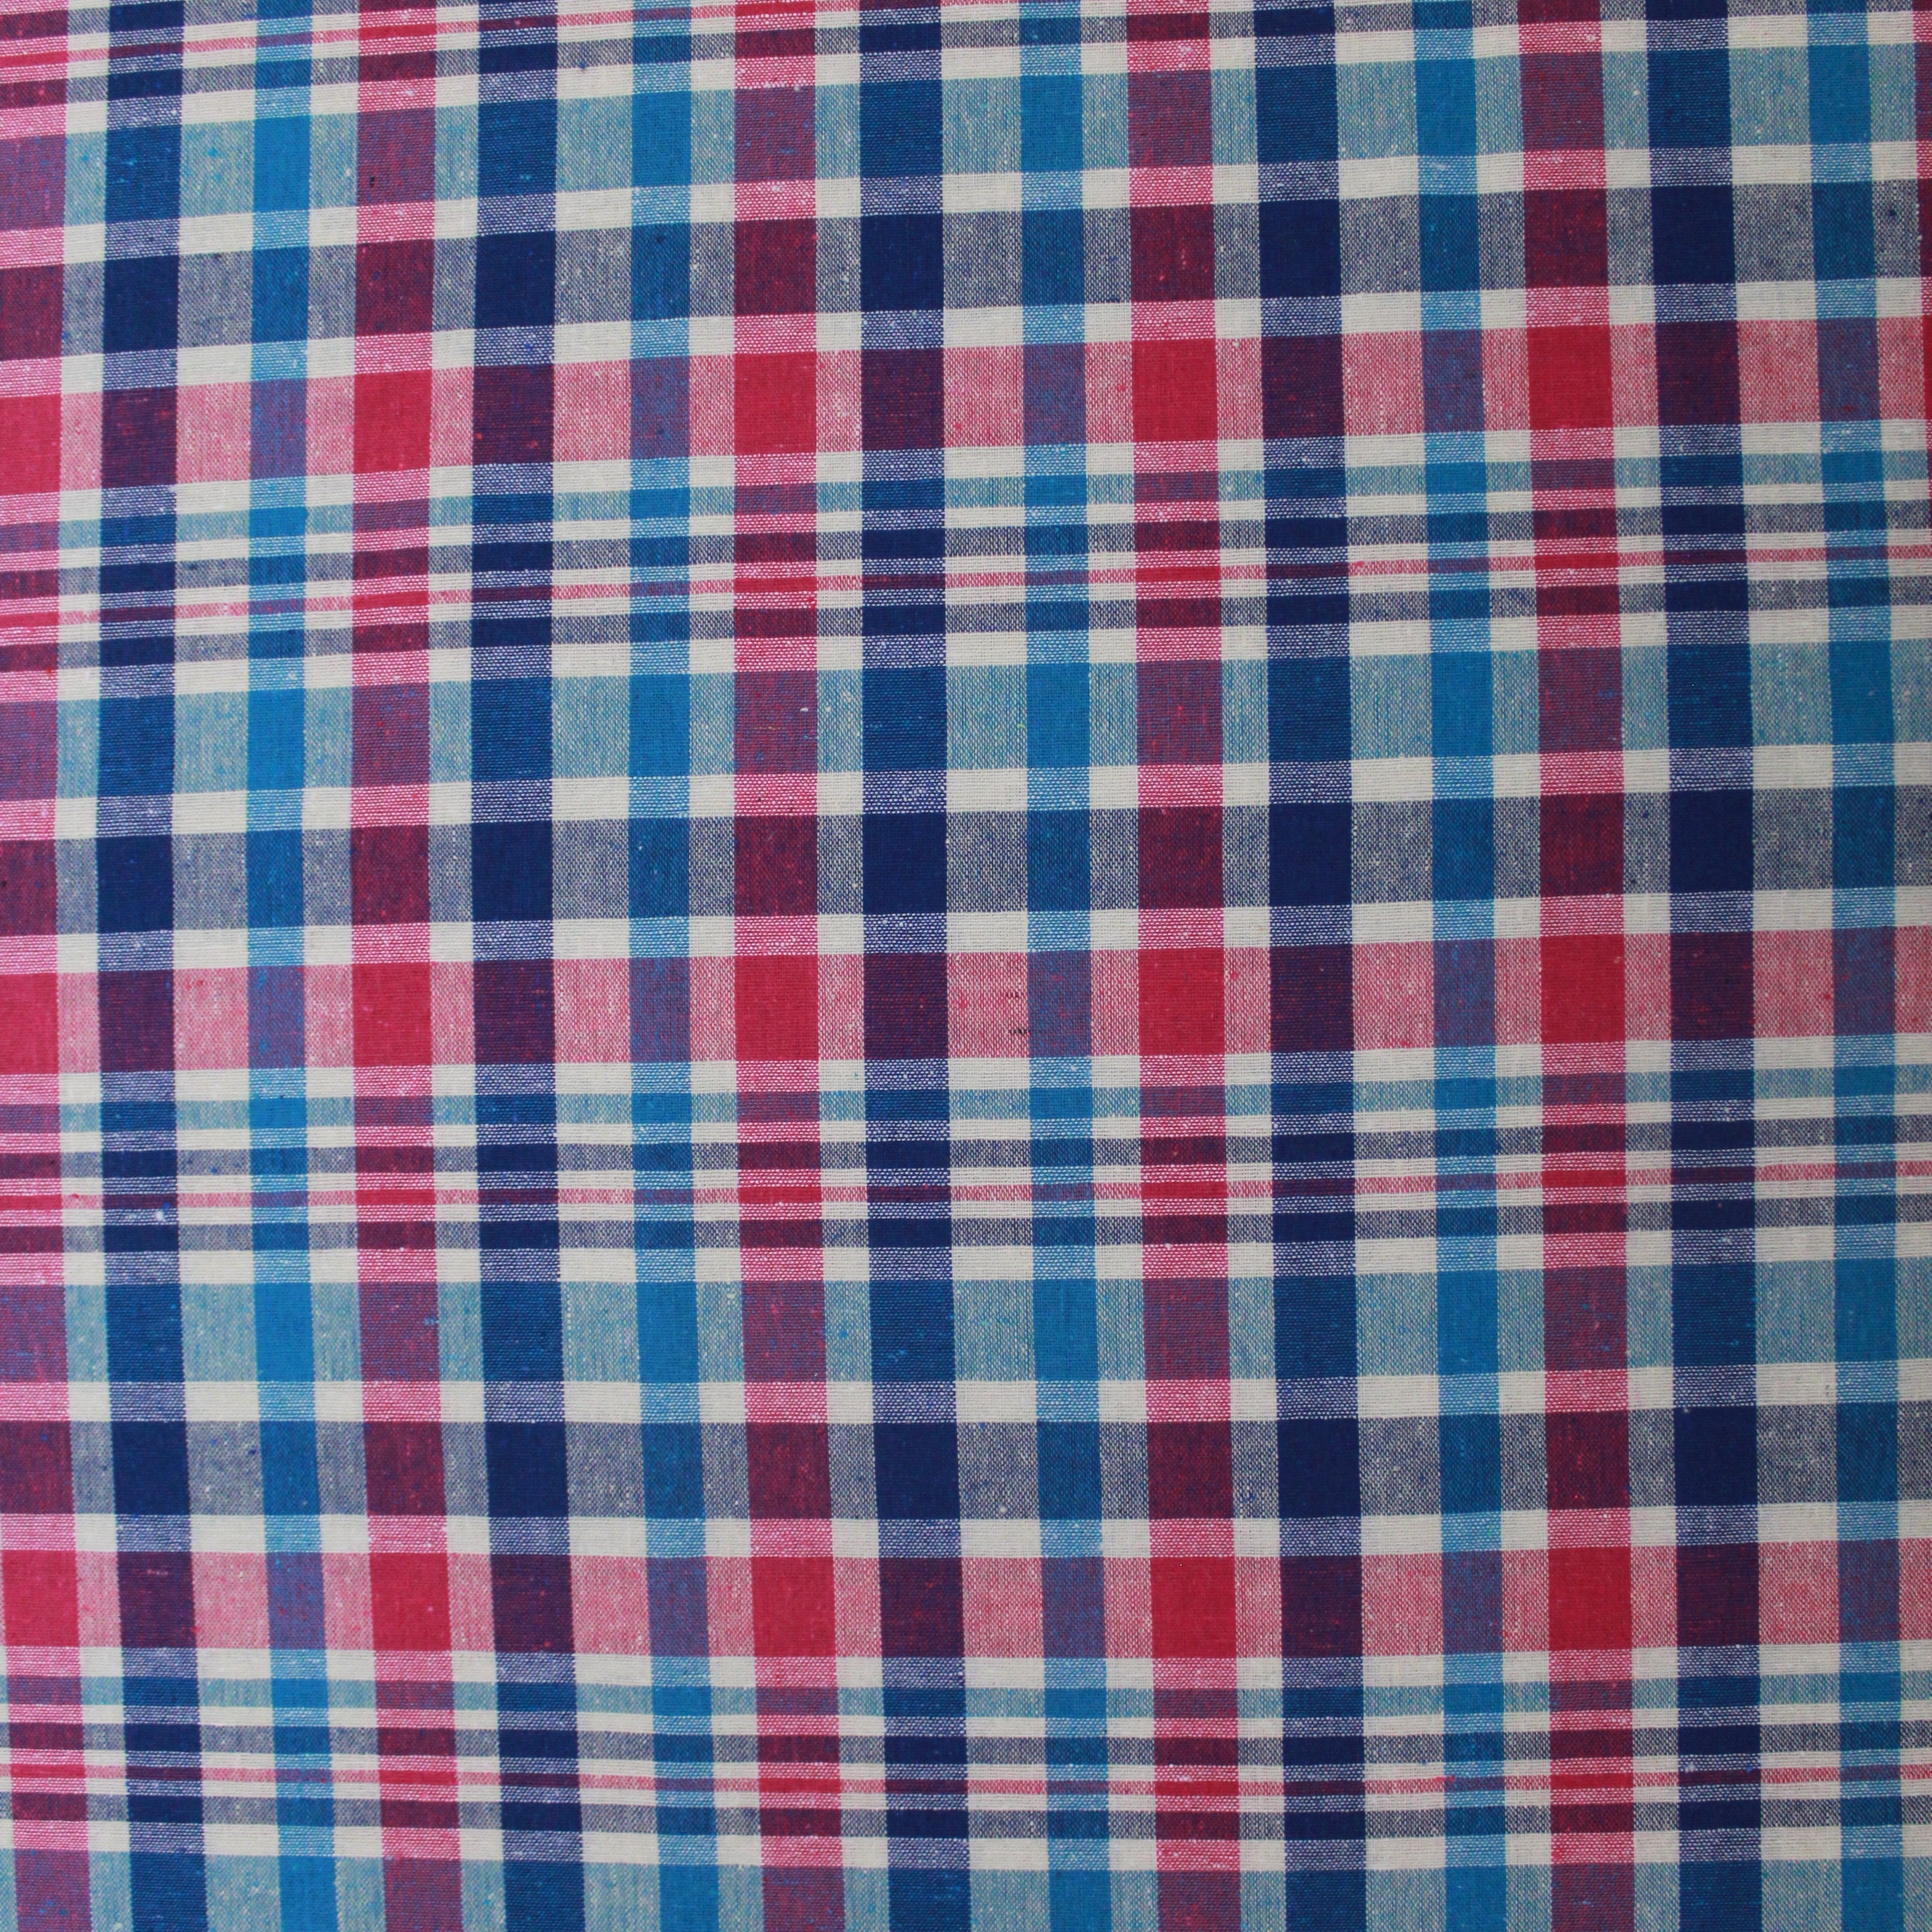 3FOR12 Premium Quality, Fashion Chequered Linen 54" Wide Blue & Pink